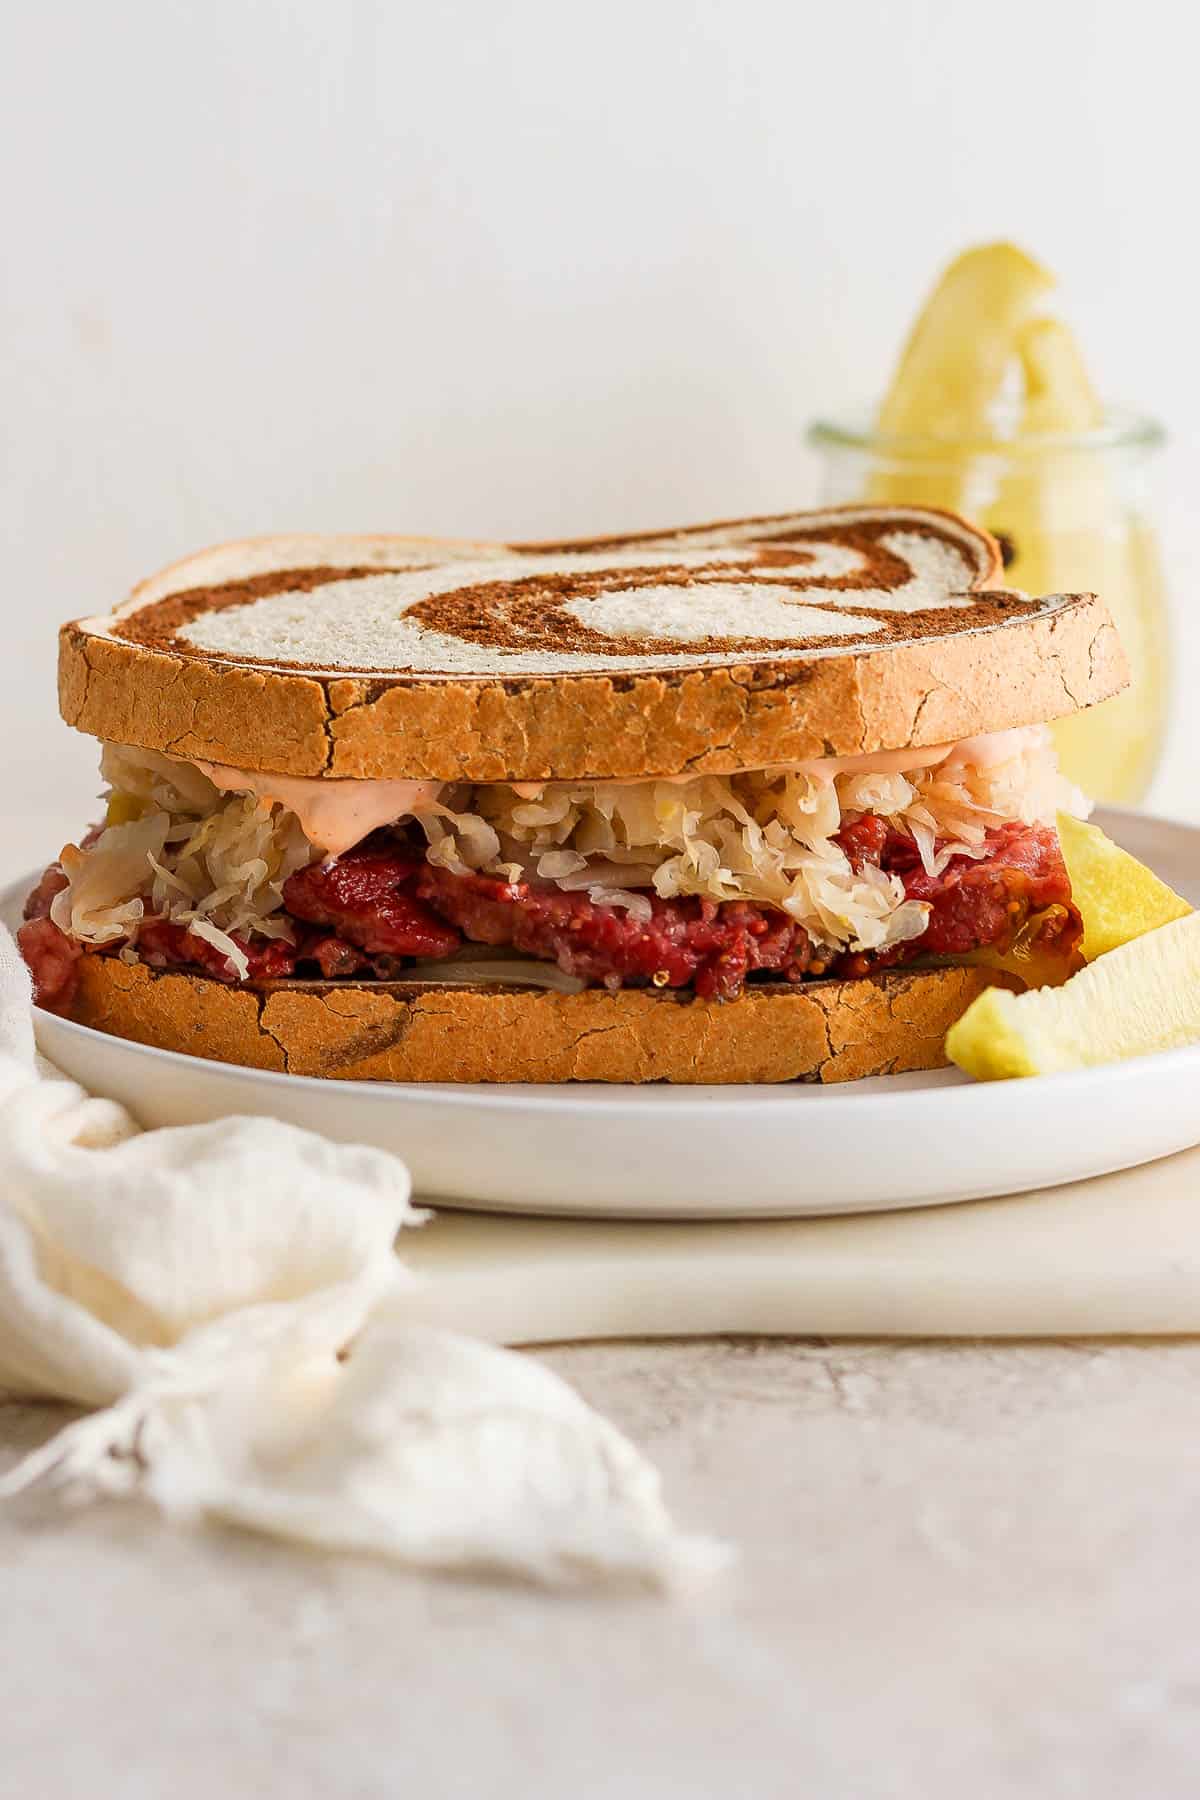 A finished reuben sandwich on a plate.